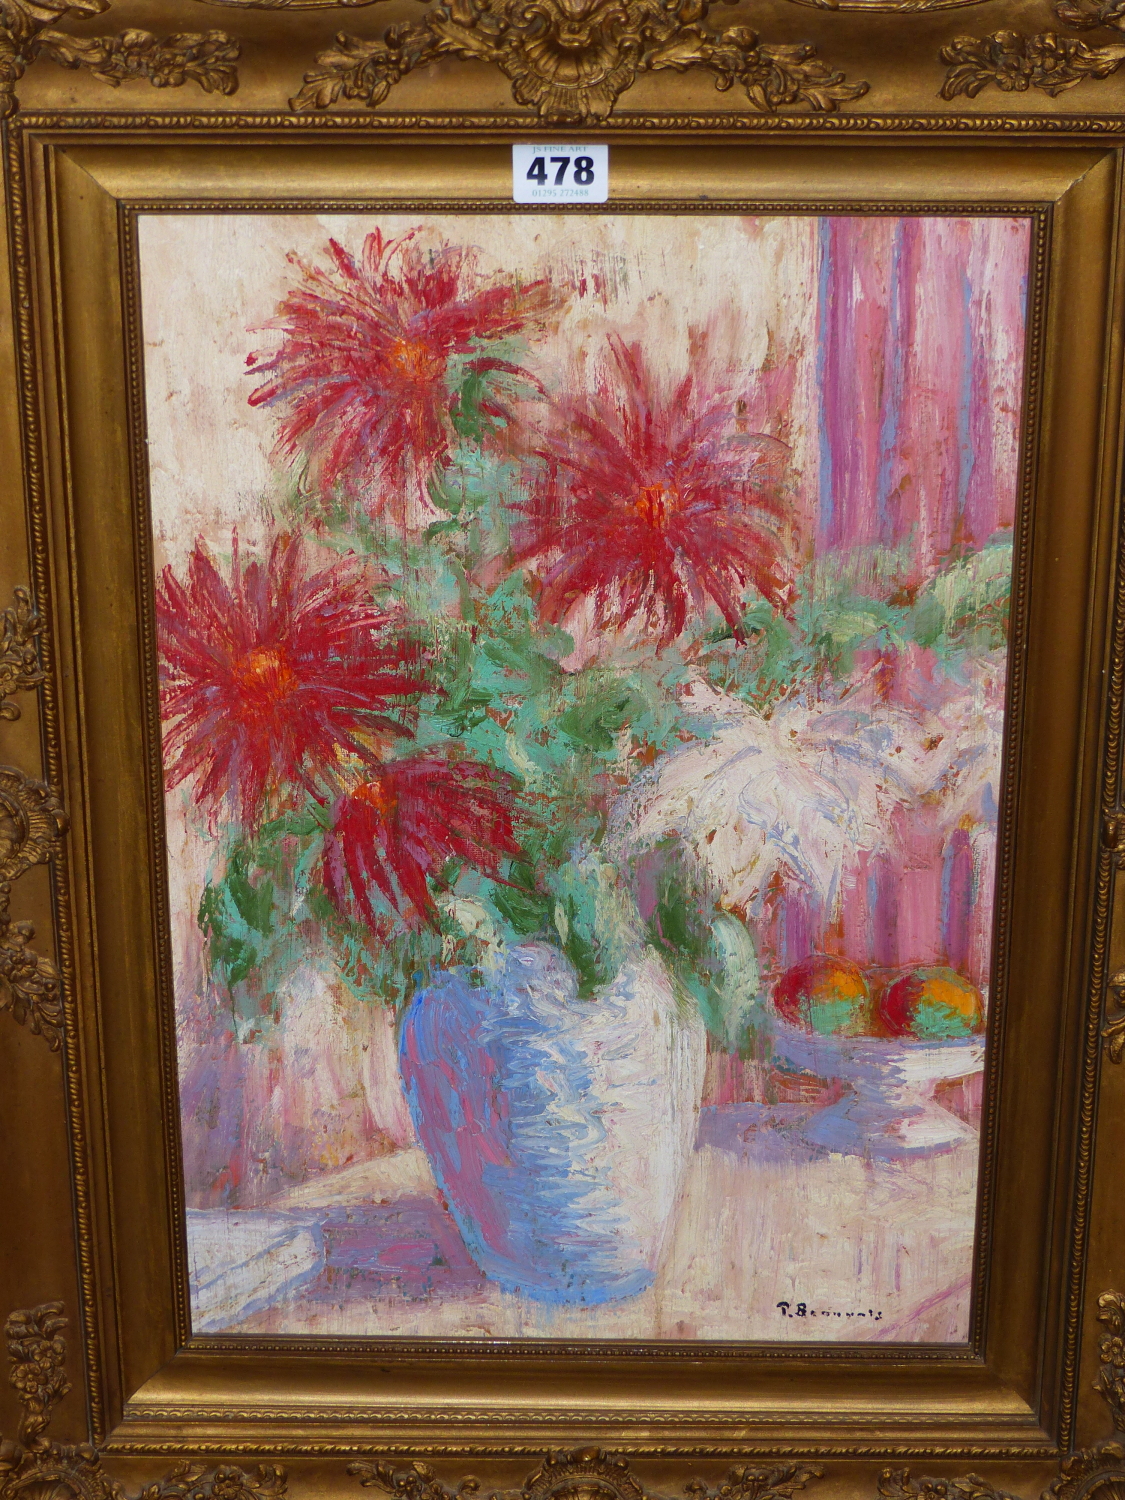 T. BENNINGS(?) (20TH CENTURY), STILL LIFE OF FLOWERS IN A VASE, SIGNED INDISTINCTLY, OIL ON BOARD, - Image 2 of 4